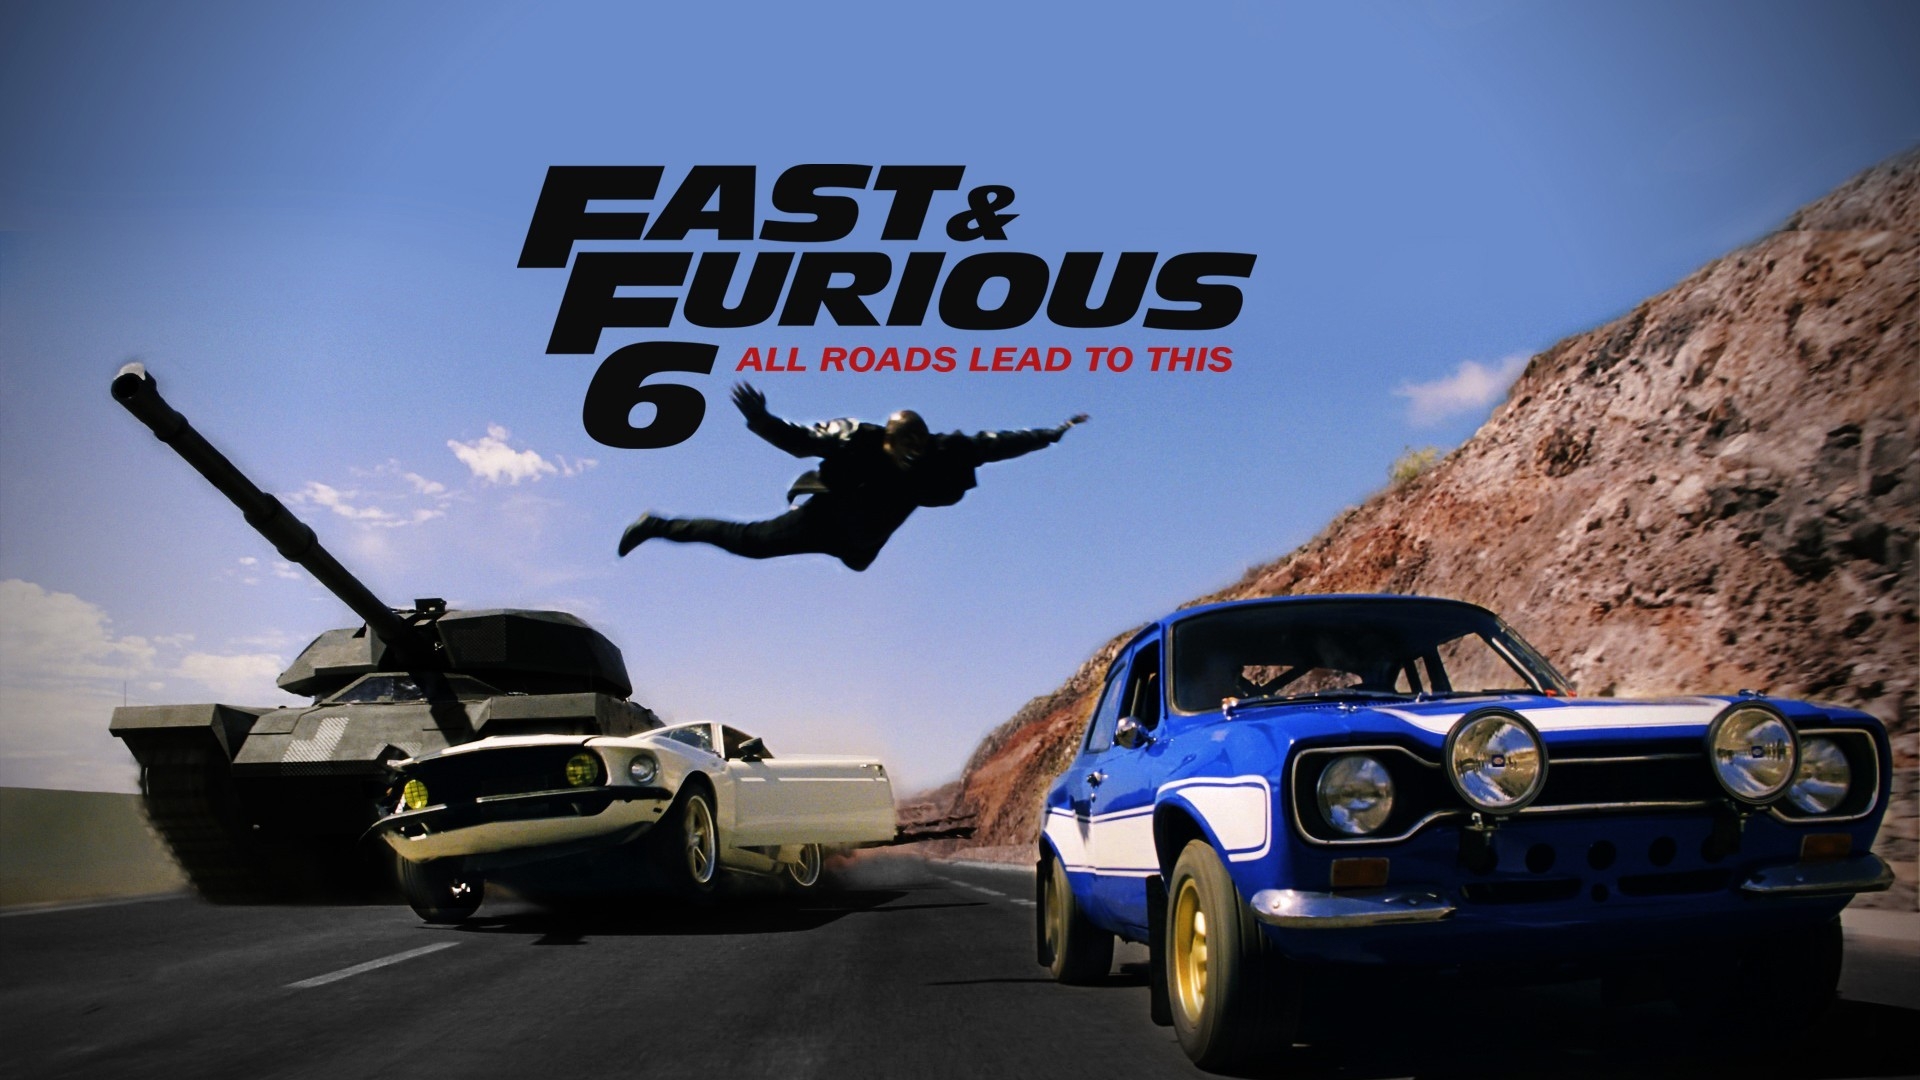 The Fast and Furious 6 for 1920 x 1080 HDTV 1080p resolution